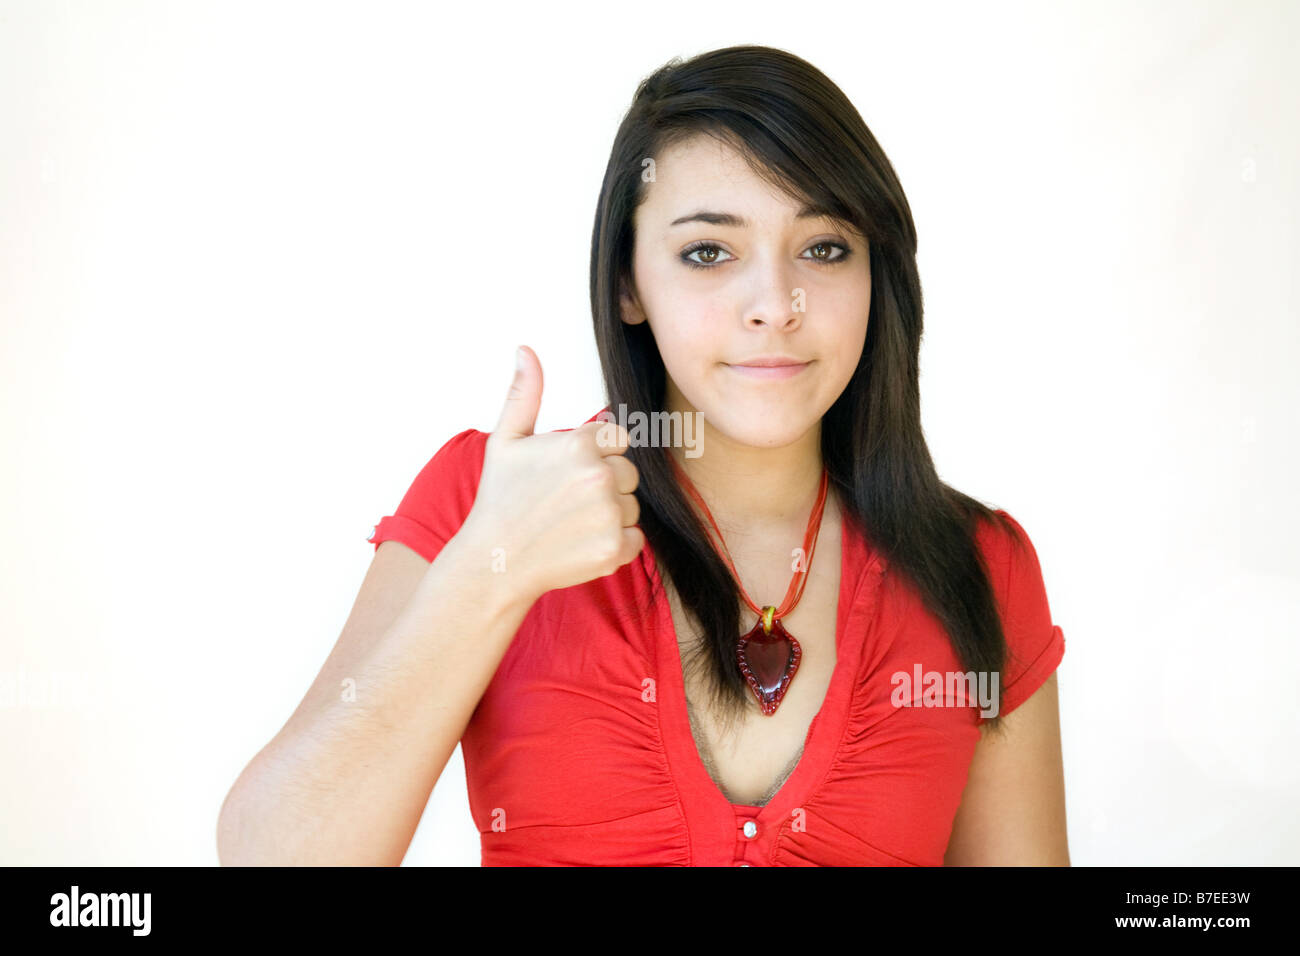 teenage girl giving the thumbs up sign Stock Photo